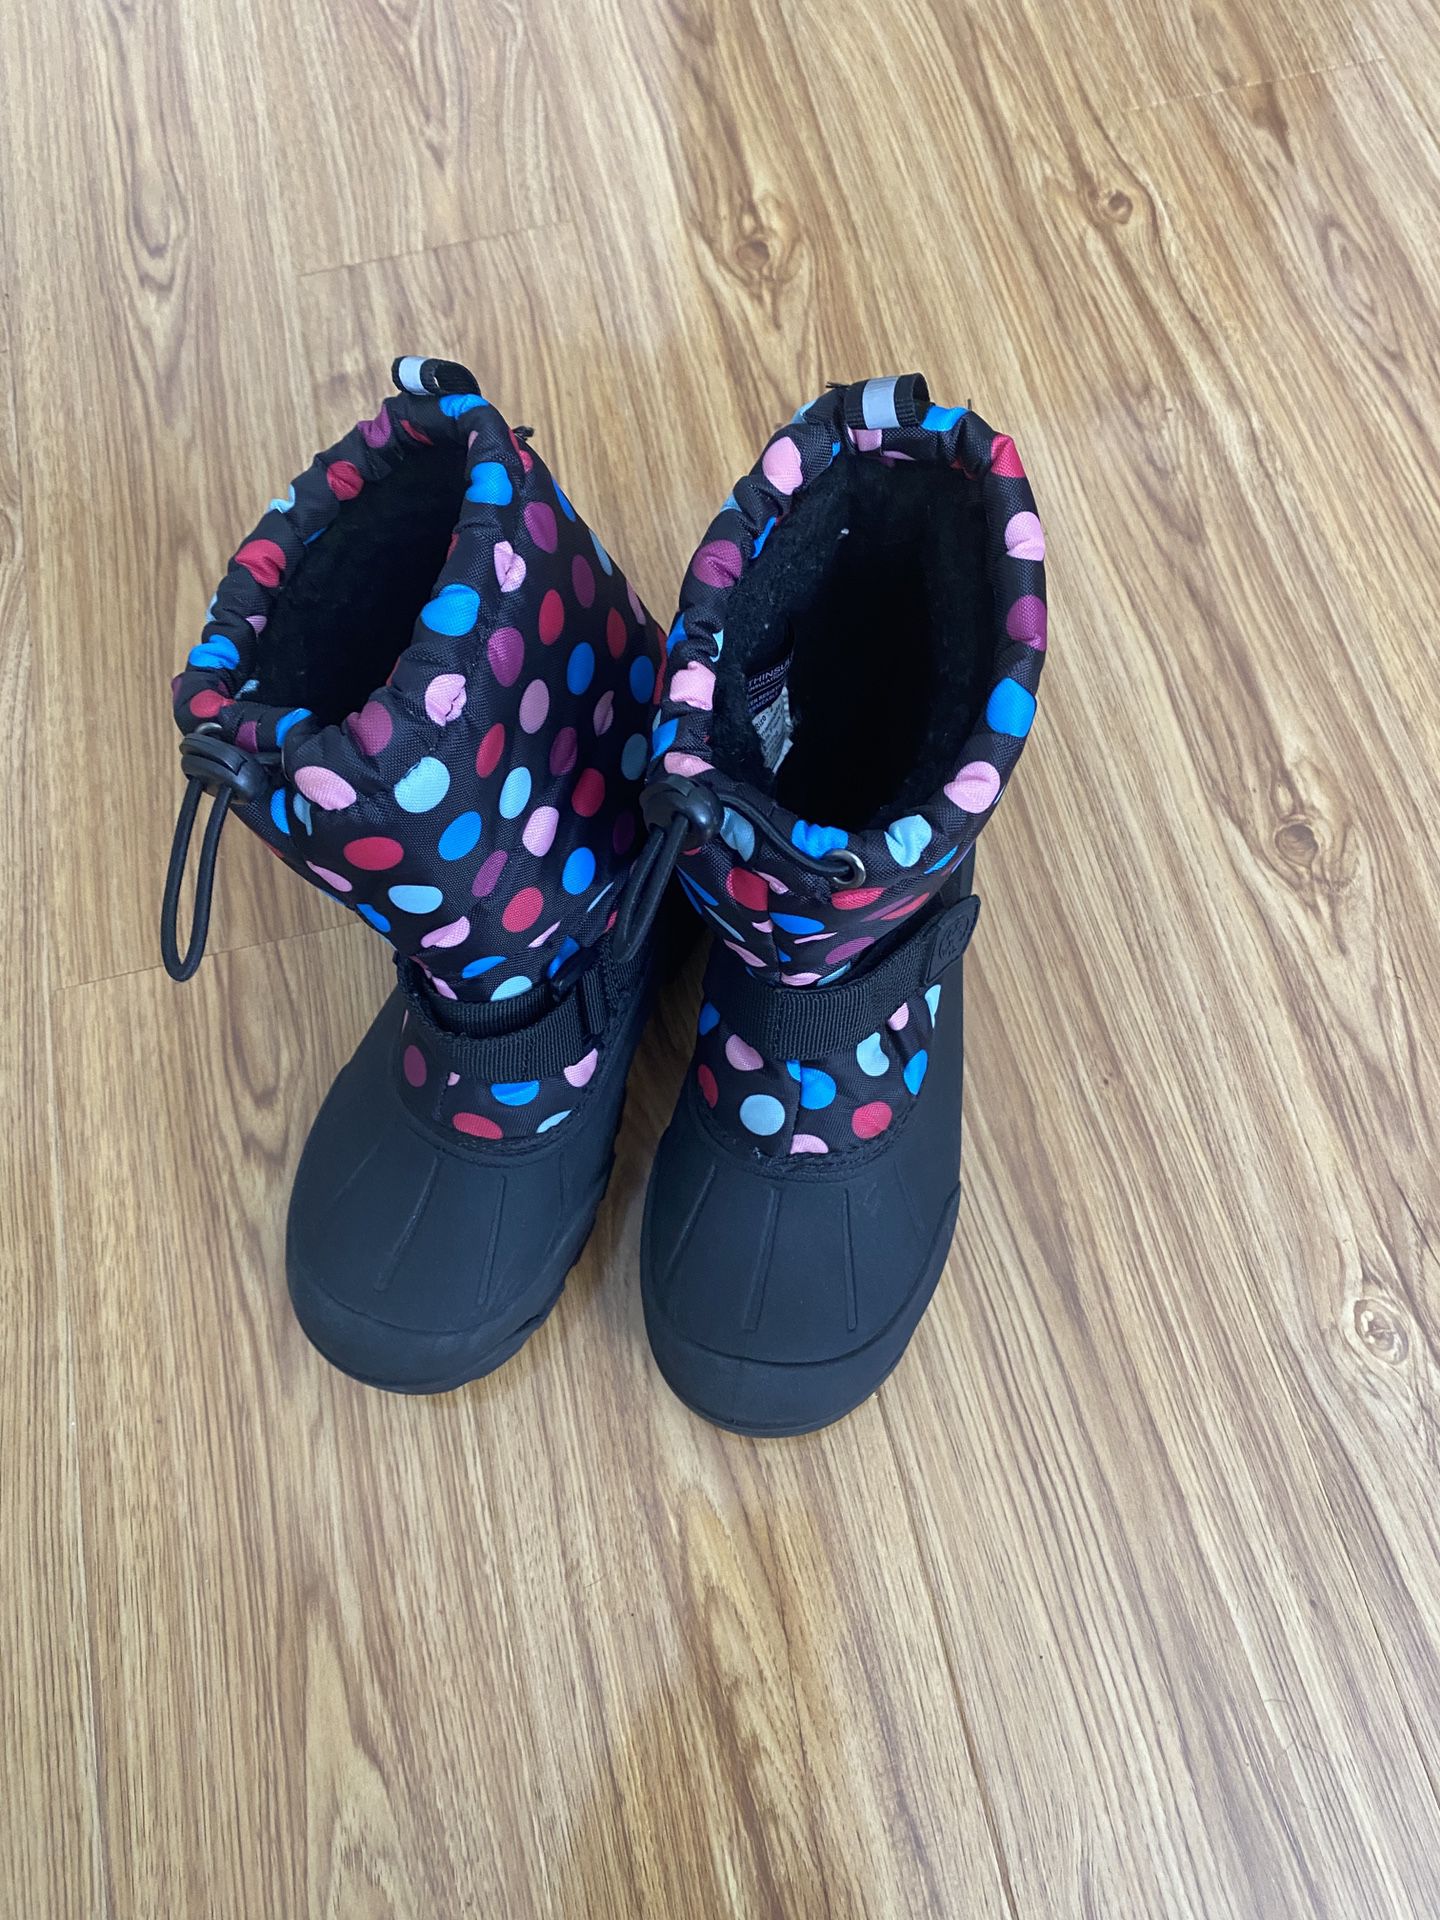 Girl Snow Boots Size 2